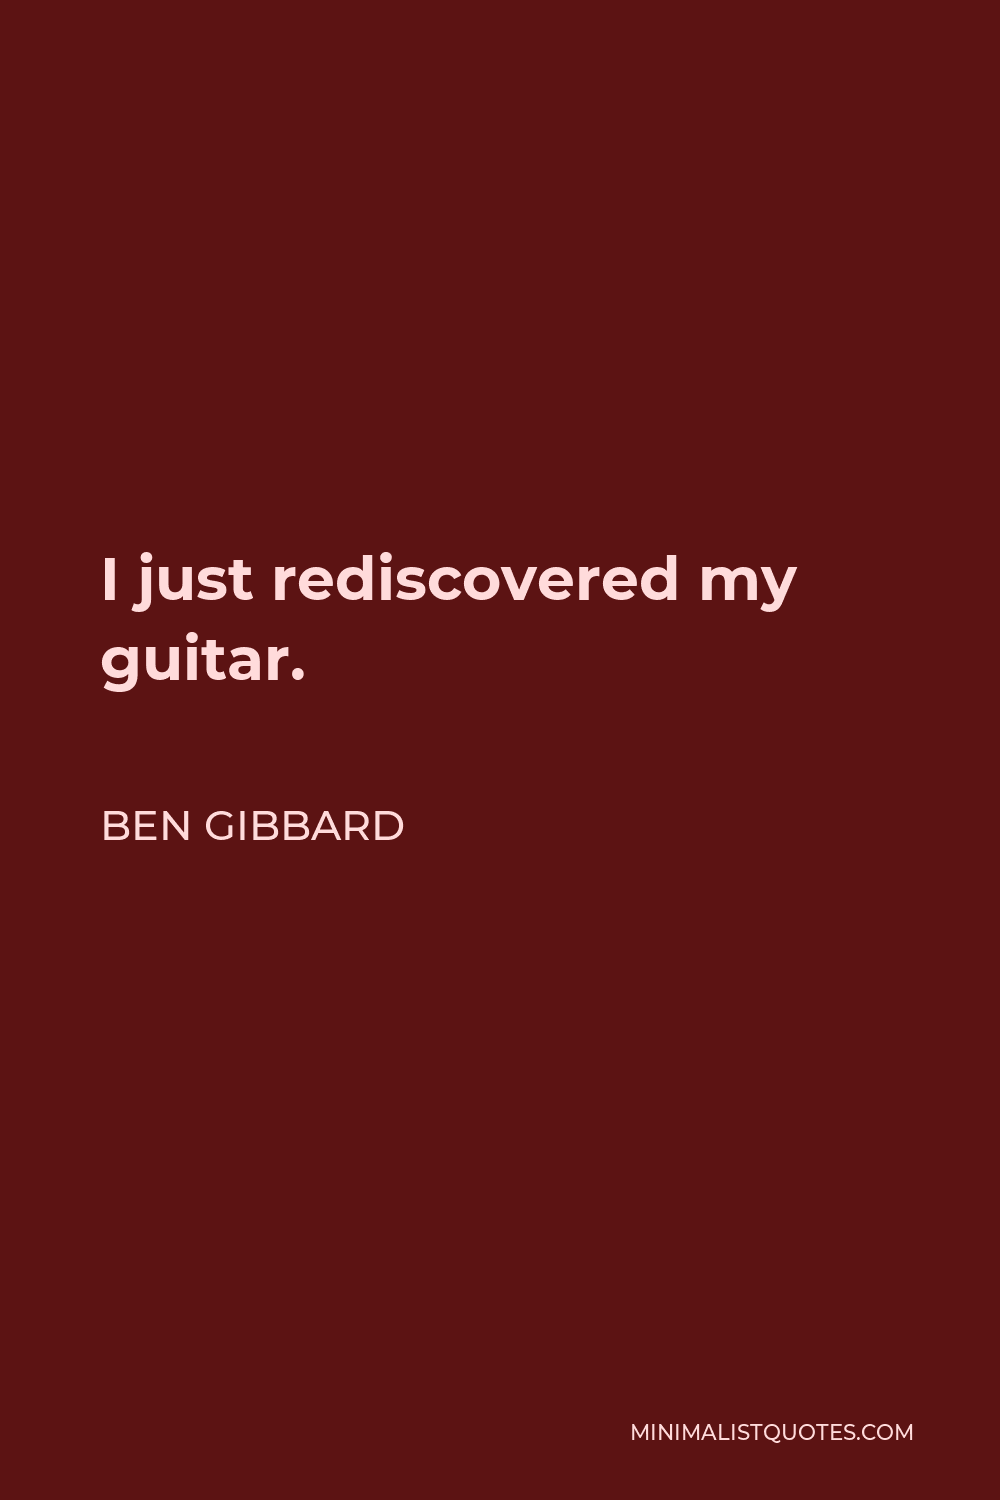 Ben Gibbard Quote - I just rediscovered my guitar.